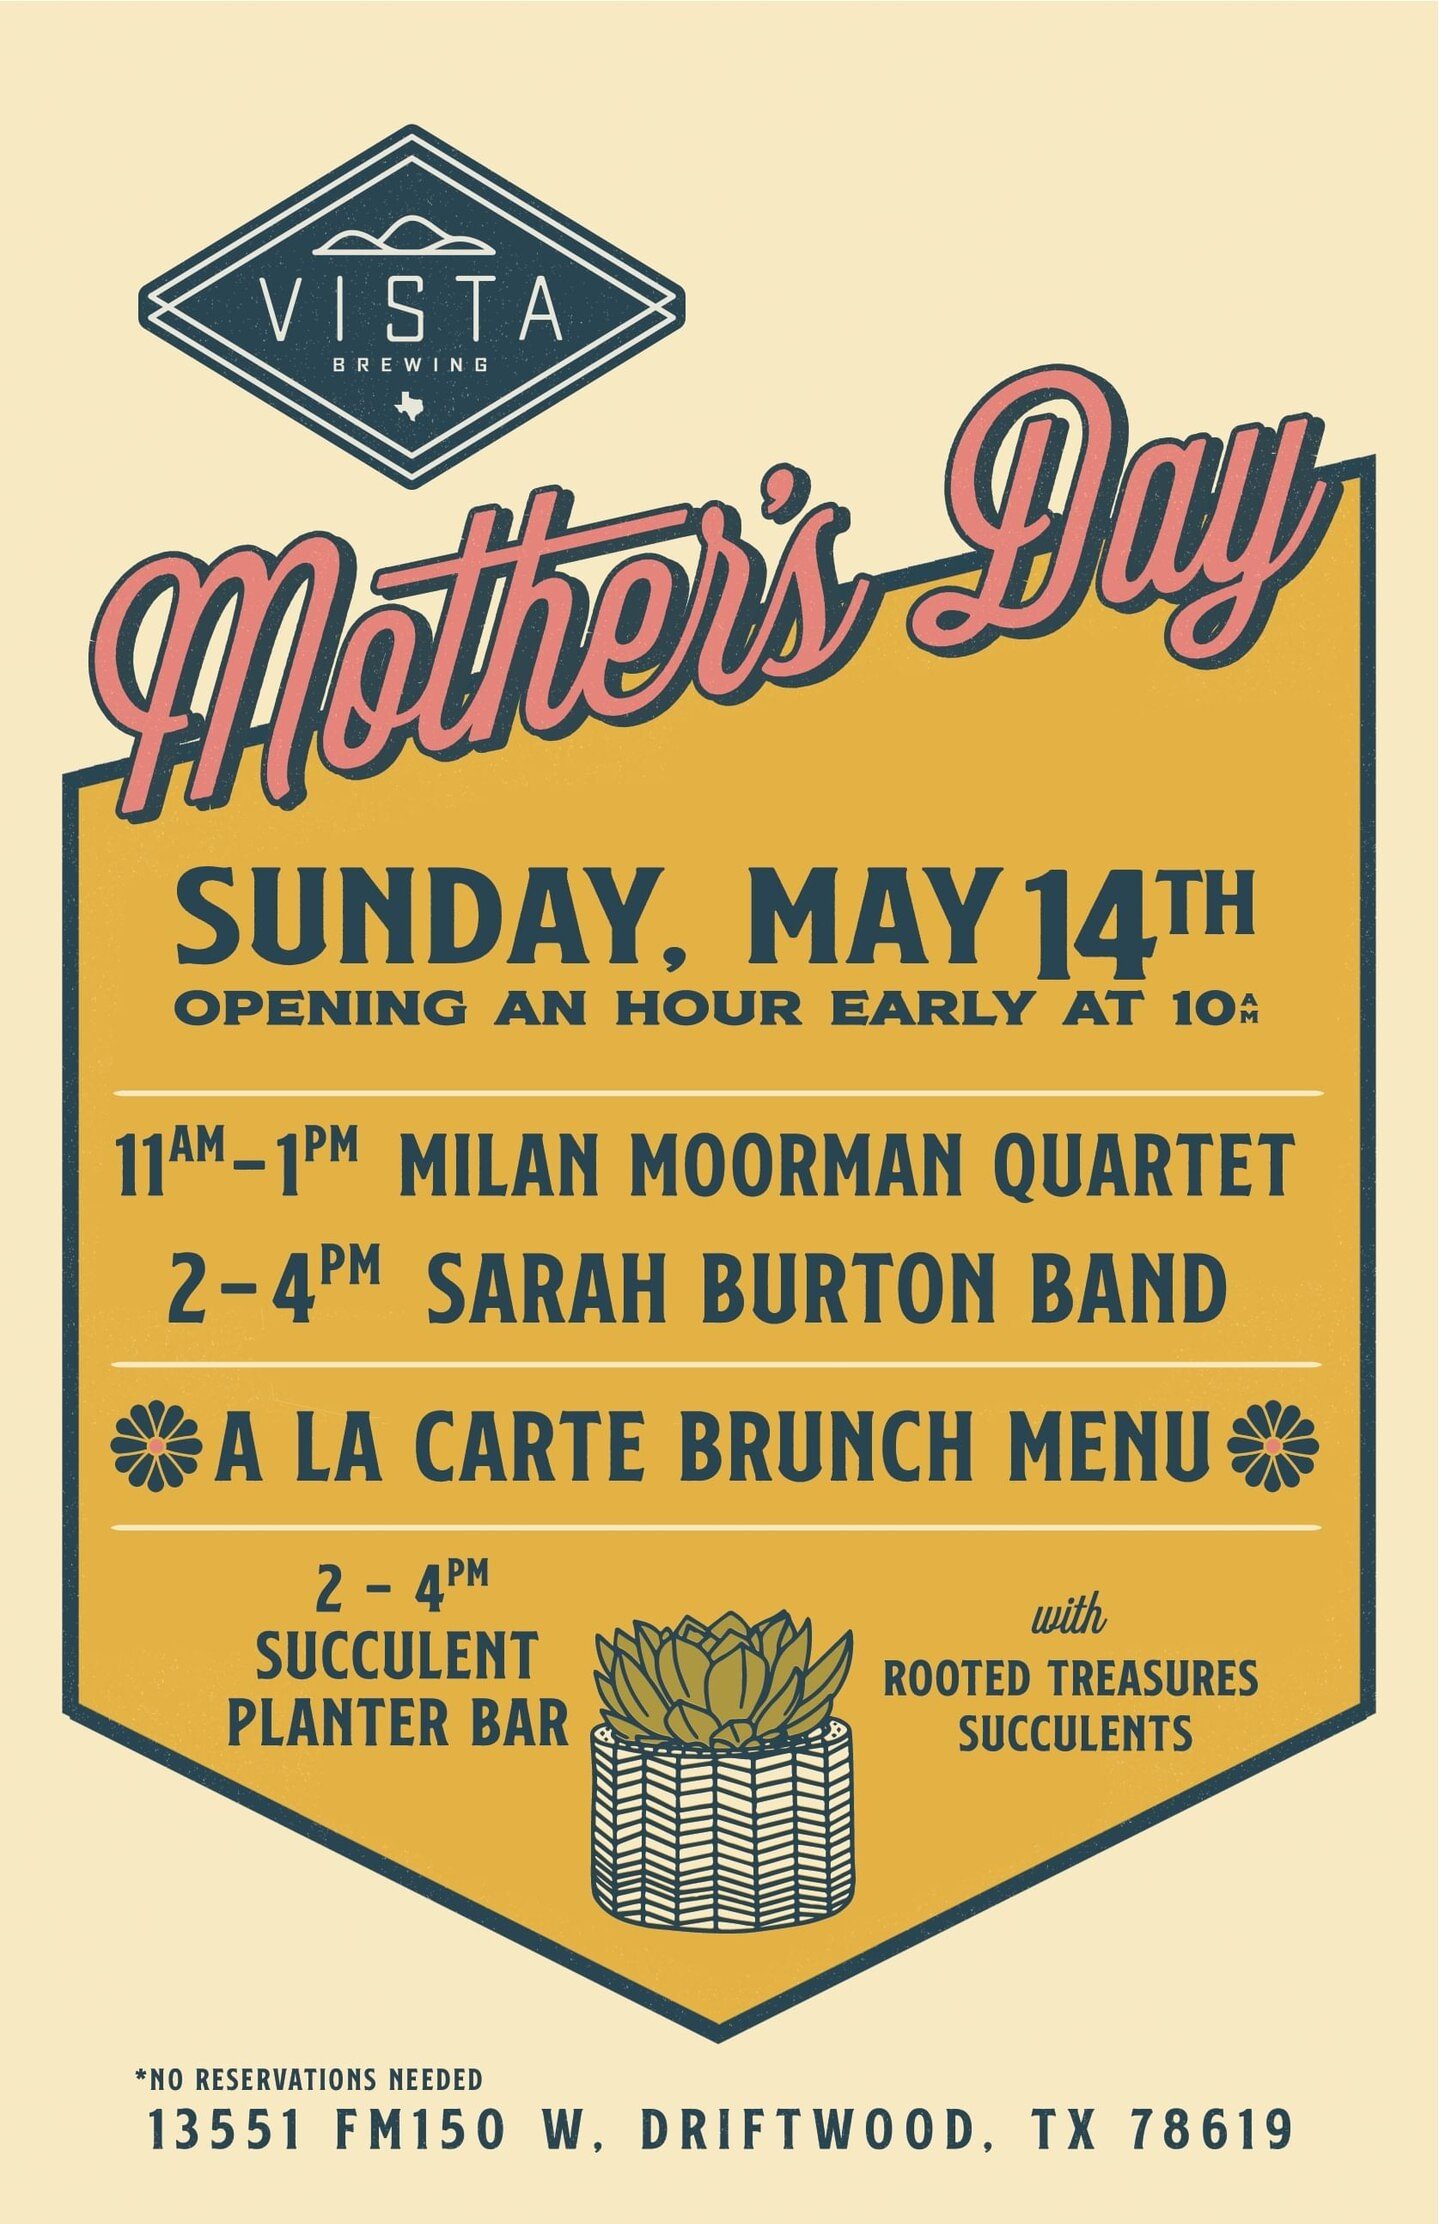 Haven't decided where to take Mom this Sunday?? Spoil her with a casual brunch, a variety of mimiosas/beer/wine/cider, and a delicious a la carte menu that runs 10am til 6 pm.  𝐓𝐡𝐞 𝐛𝐞𝐬𝐭 𝐩𝐚𝐫𝐭....𝐧𝐨 𝐫𝐞𝐬𝐞𝐫𝐯𝐚𝐭𝐢𝐨𝐧𝐬 𝐧𝐞𝐞𝐝𝐞𝐝.

